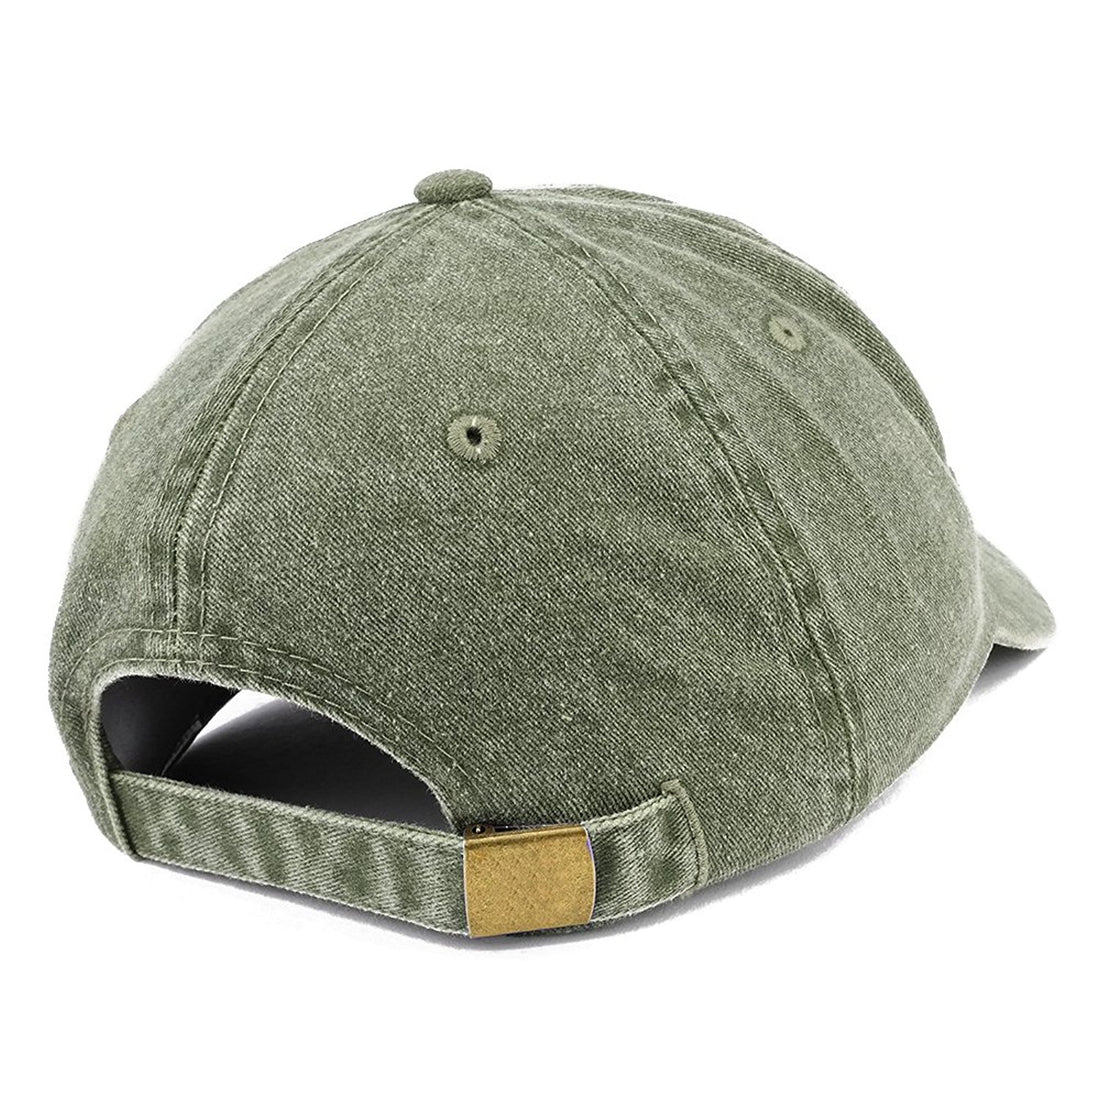 Trendy Apparel Shop Established 1947 Embroidered 72nd Birthday Gift Pigment Dyed Washed Cotton Cap